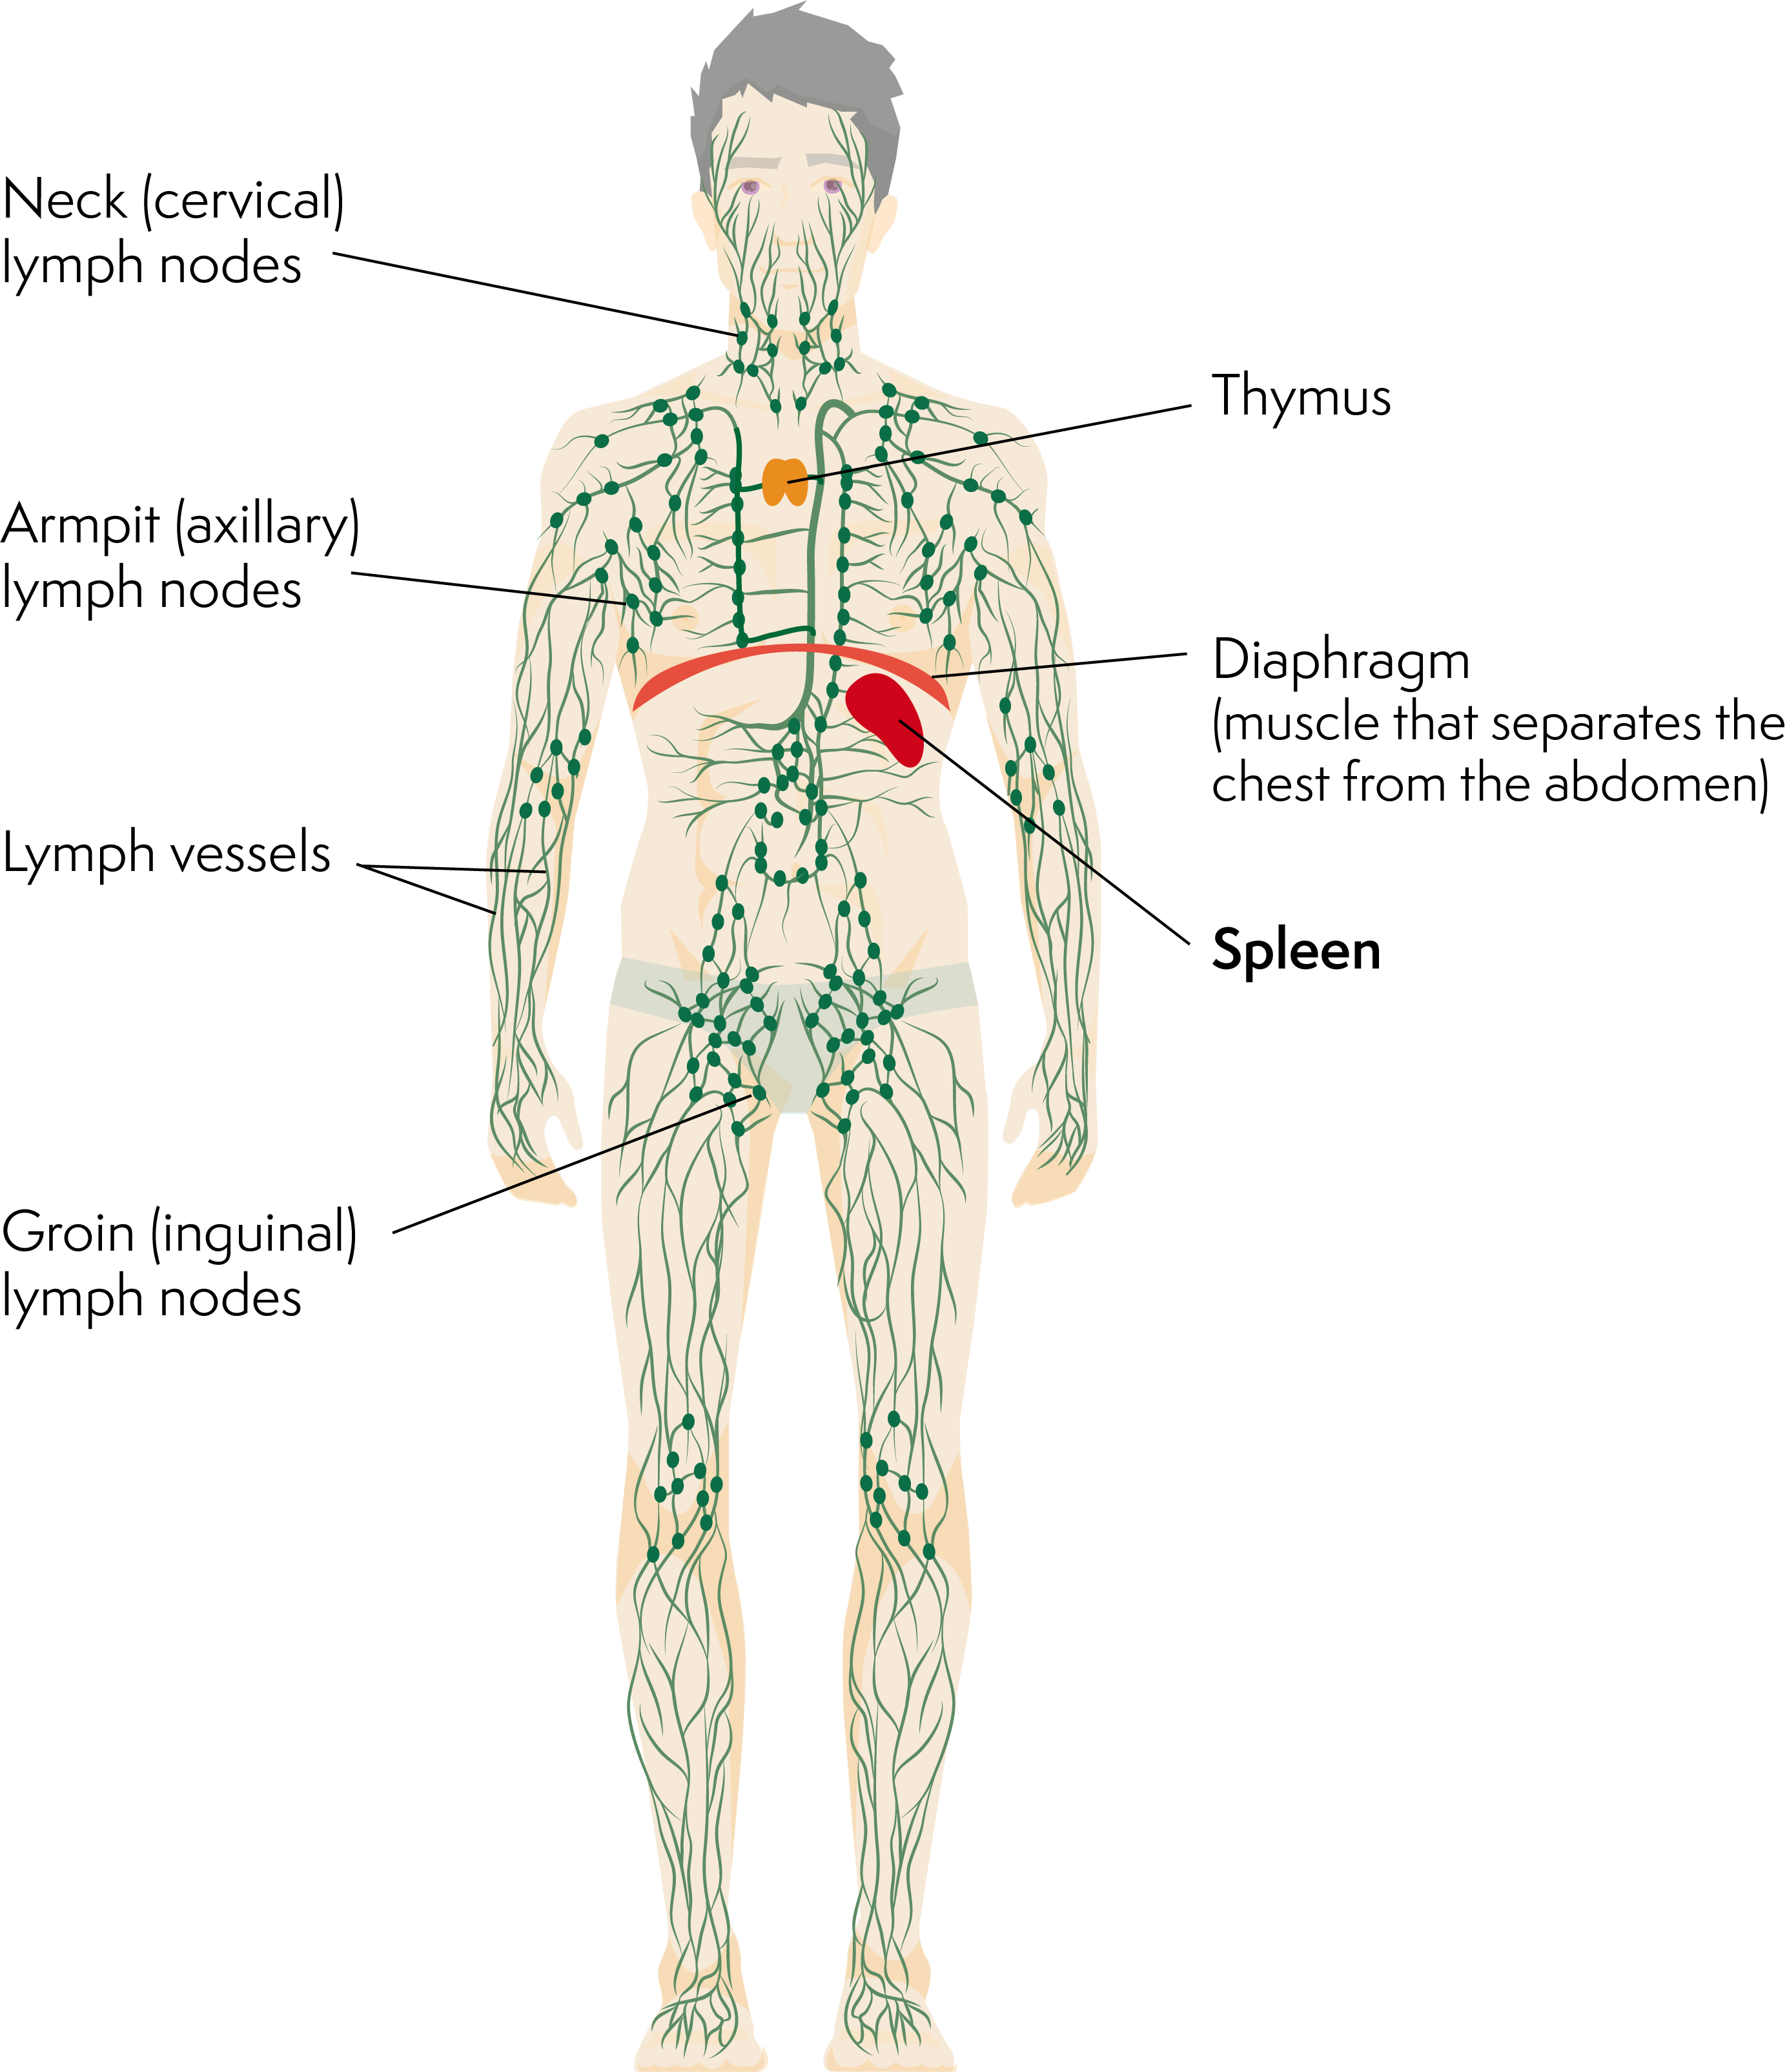 The lymphatic system, including the spleen